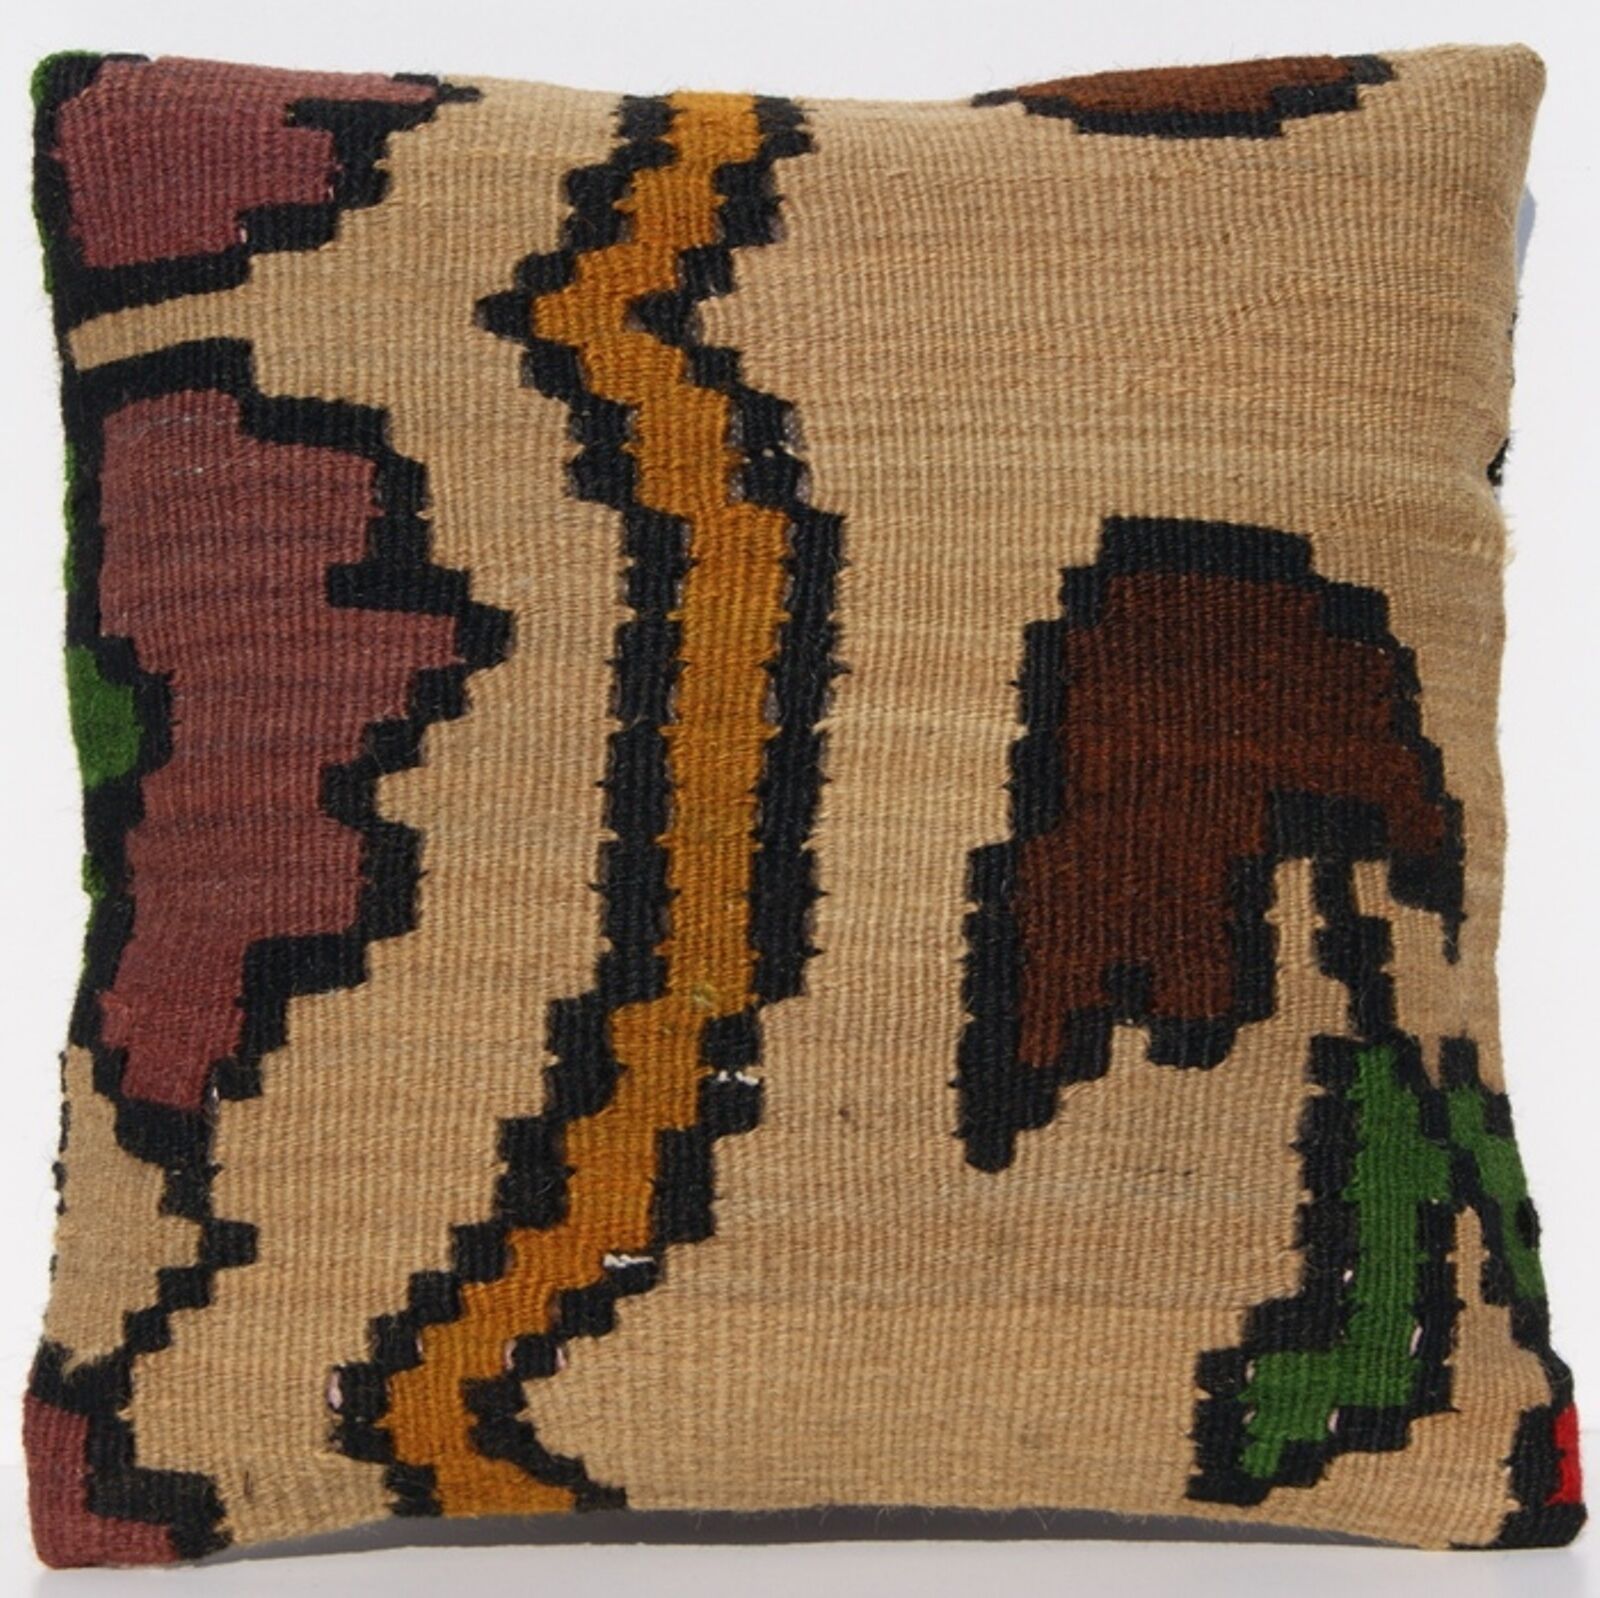  12"X12"  HOME LIVING PILLOW CASE YUGOSLAVIAN FLORAL SQUARE BROWN AREA RUGS 30+